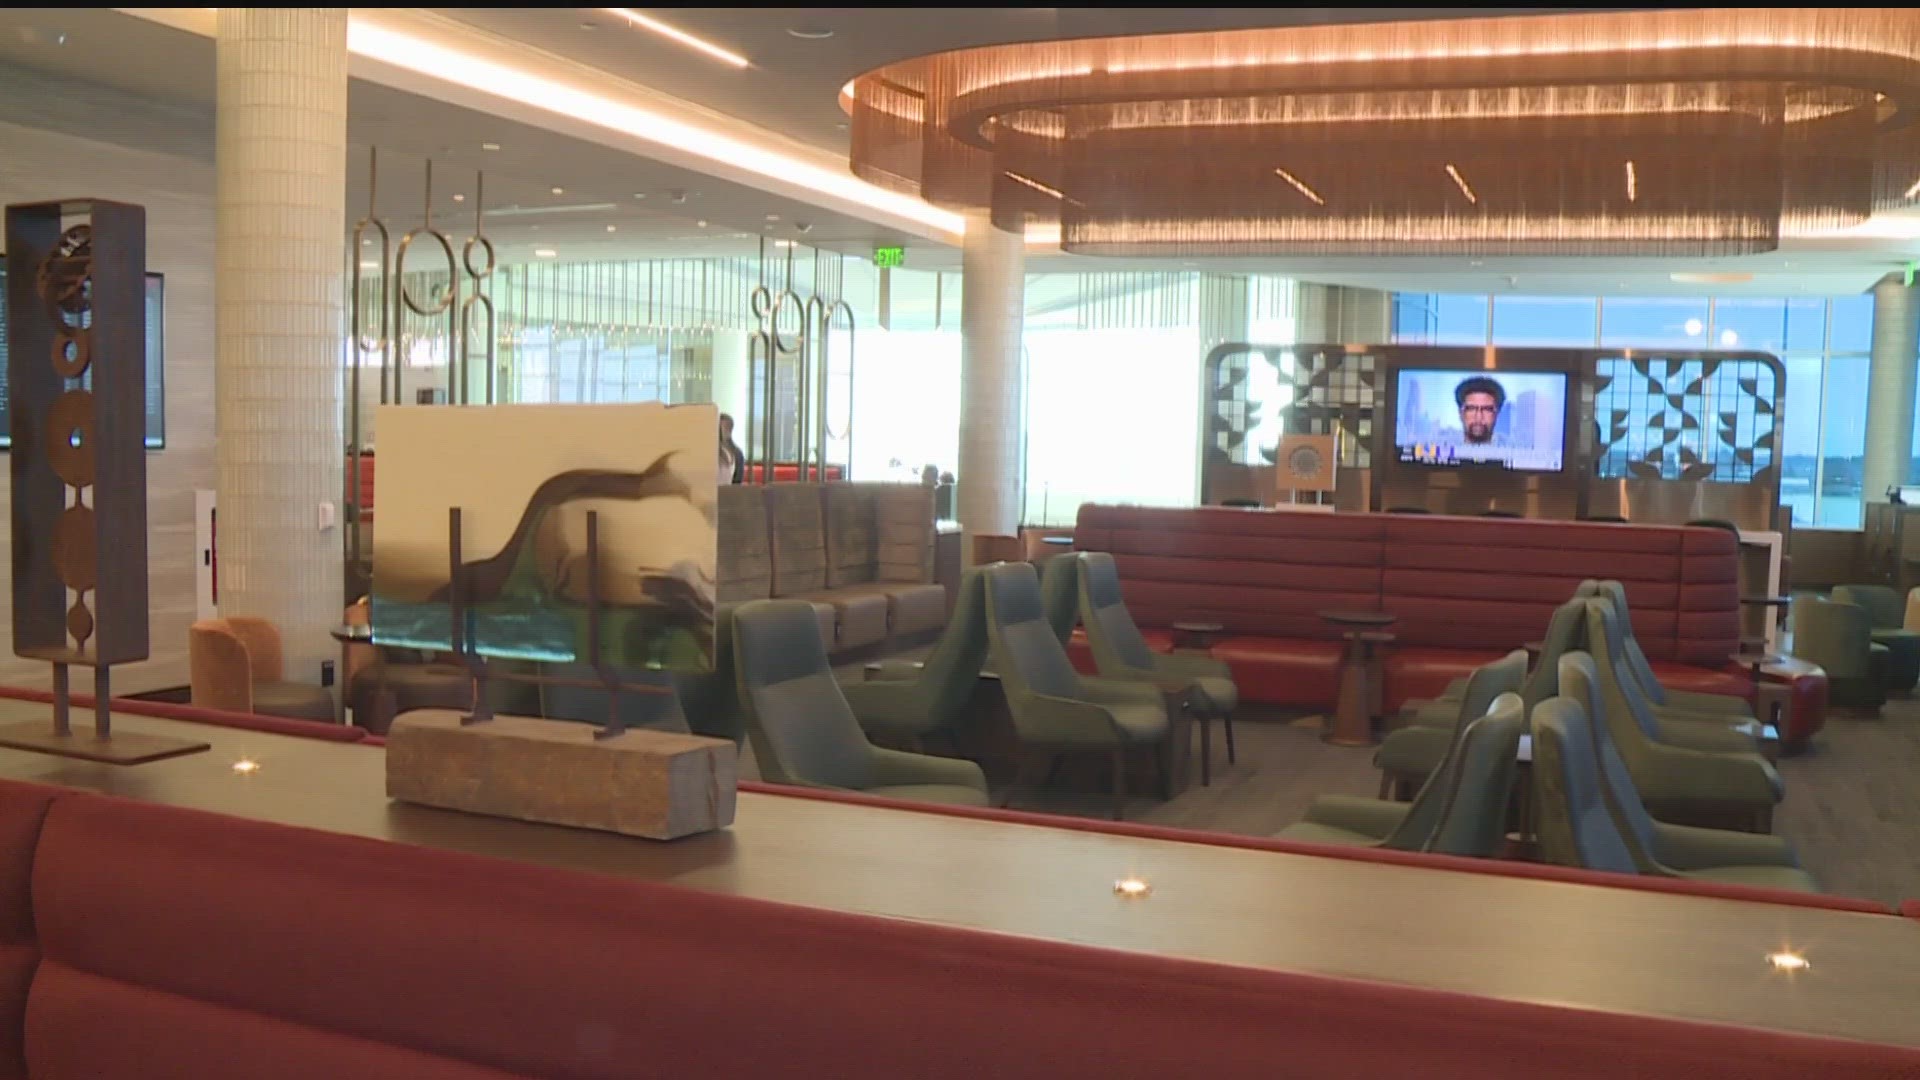 Delta's third lounge (the largest at MSP) has seating for 450 visitors, open-air spaces and features recipes from local chef Justin Sutherland.